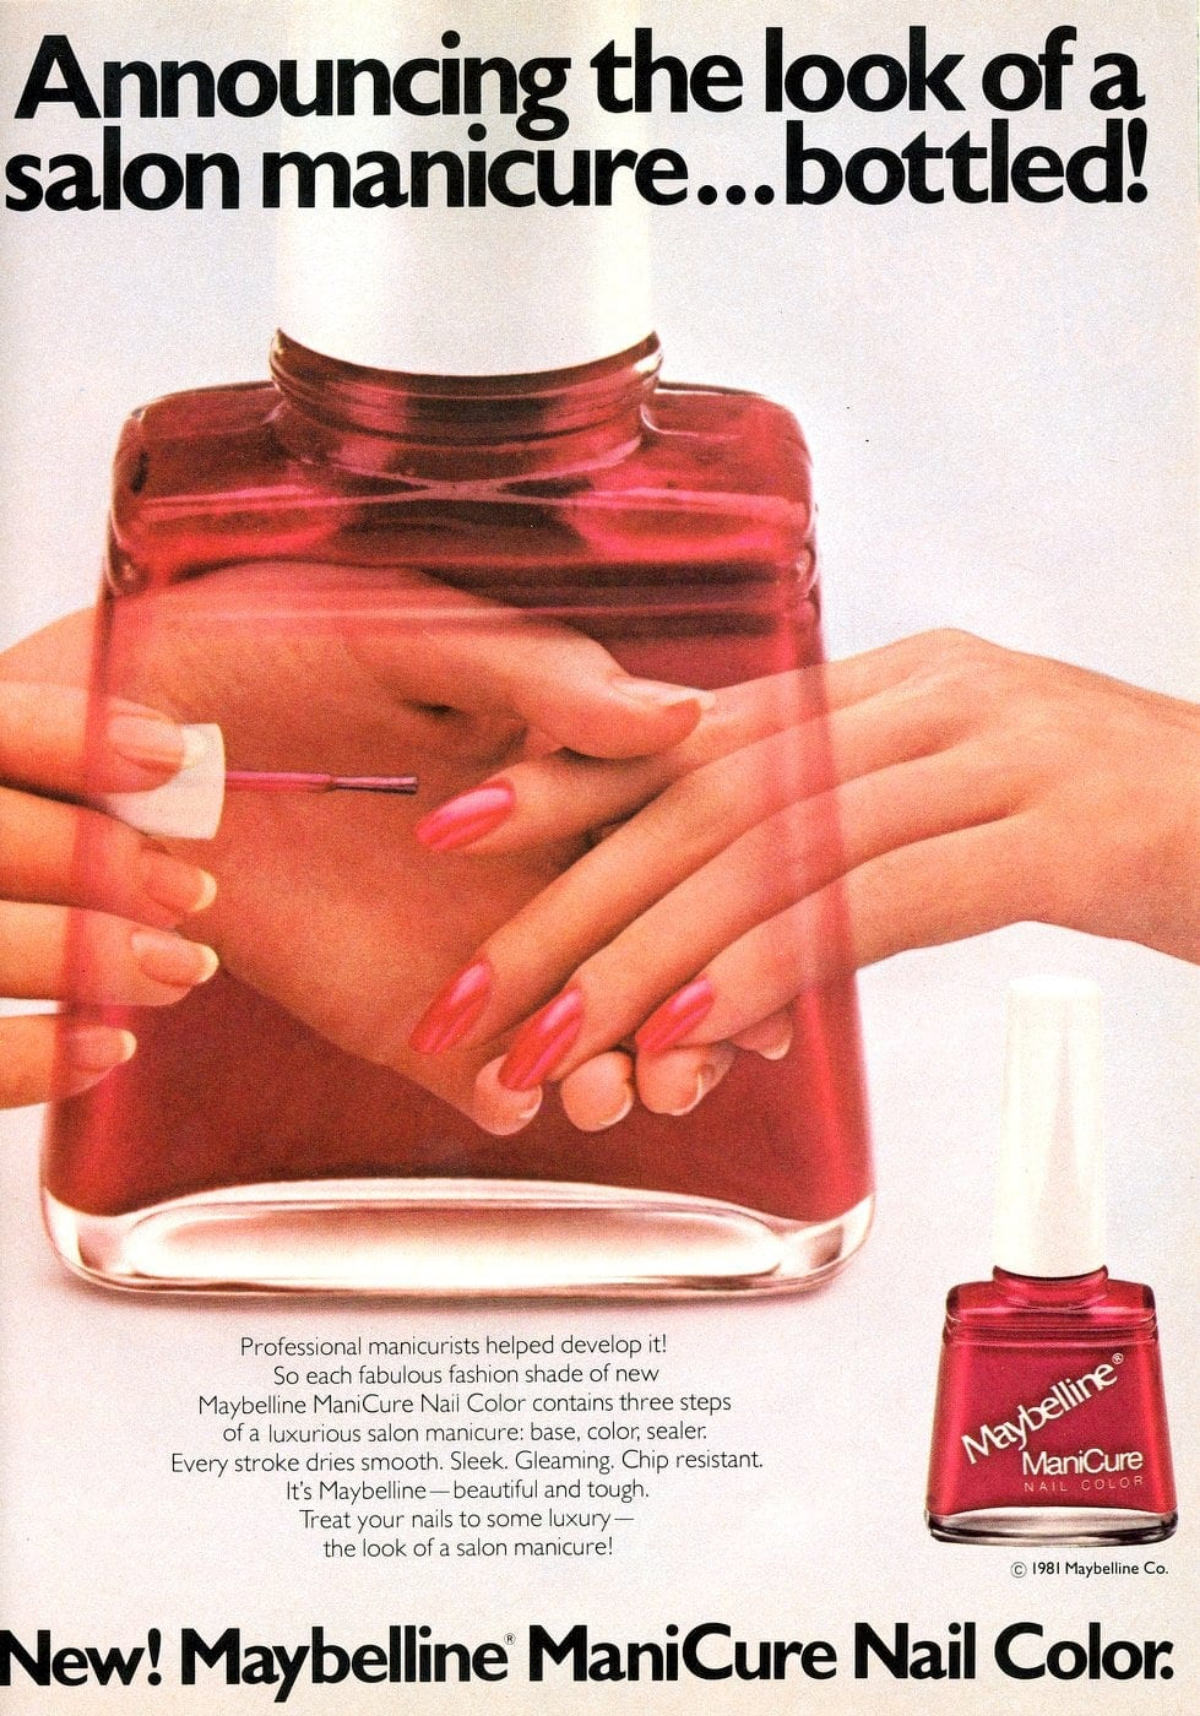 New! Maybelline ManiCure Nail Color, 1981.